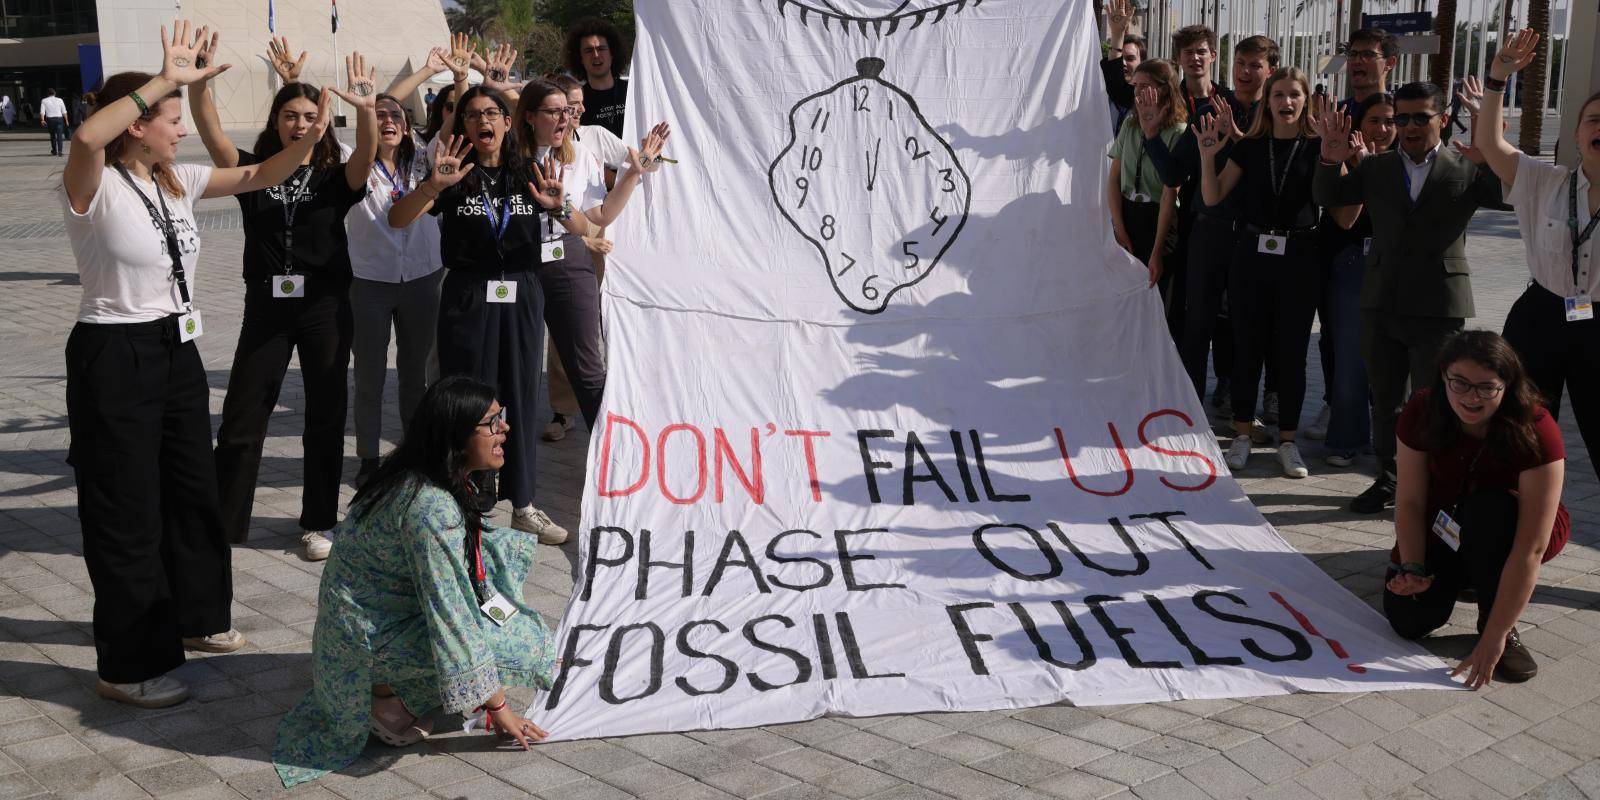 To phase out or phase down? Why the debate on fossil fuels misses